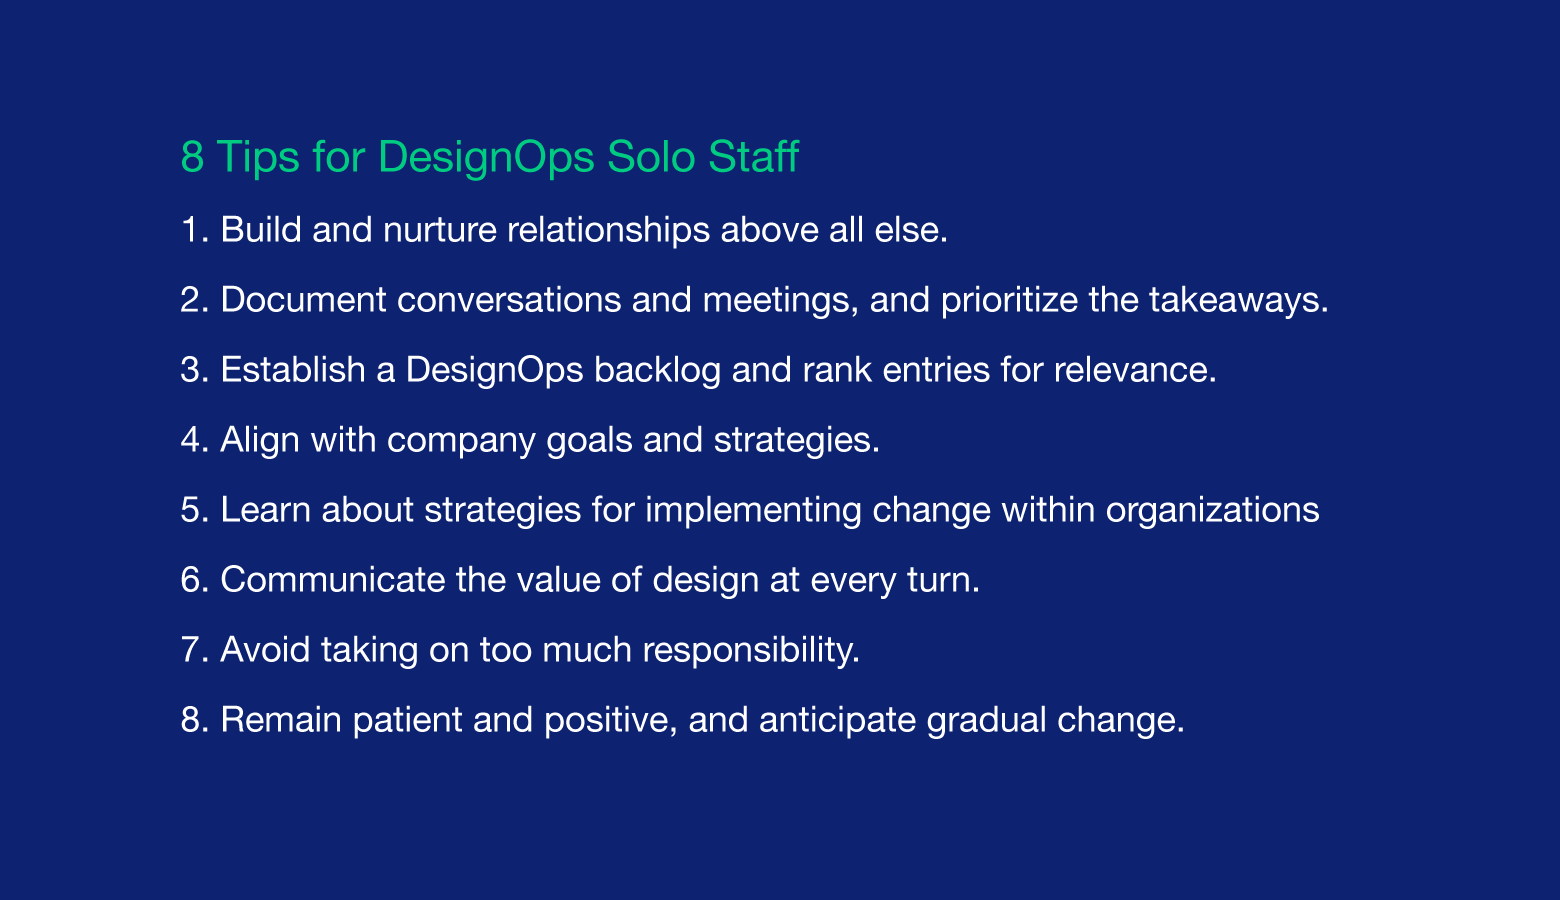 DesignOps solo staff need patience and determination.